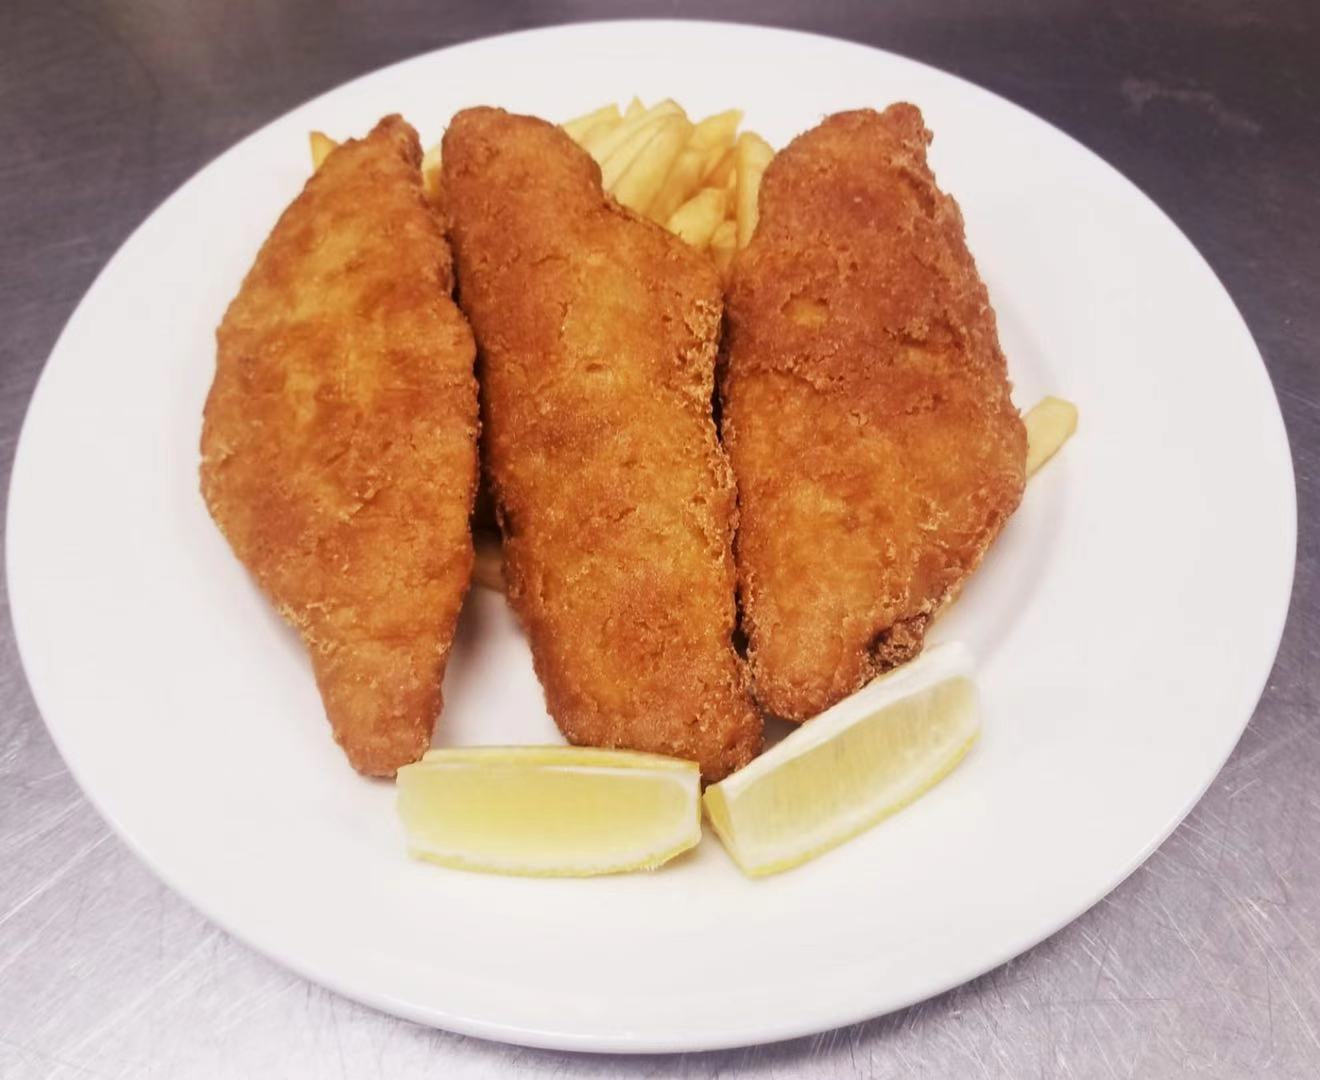 261. Fish and Chips